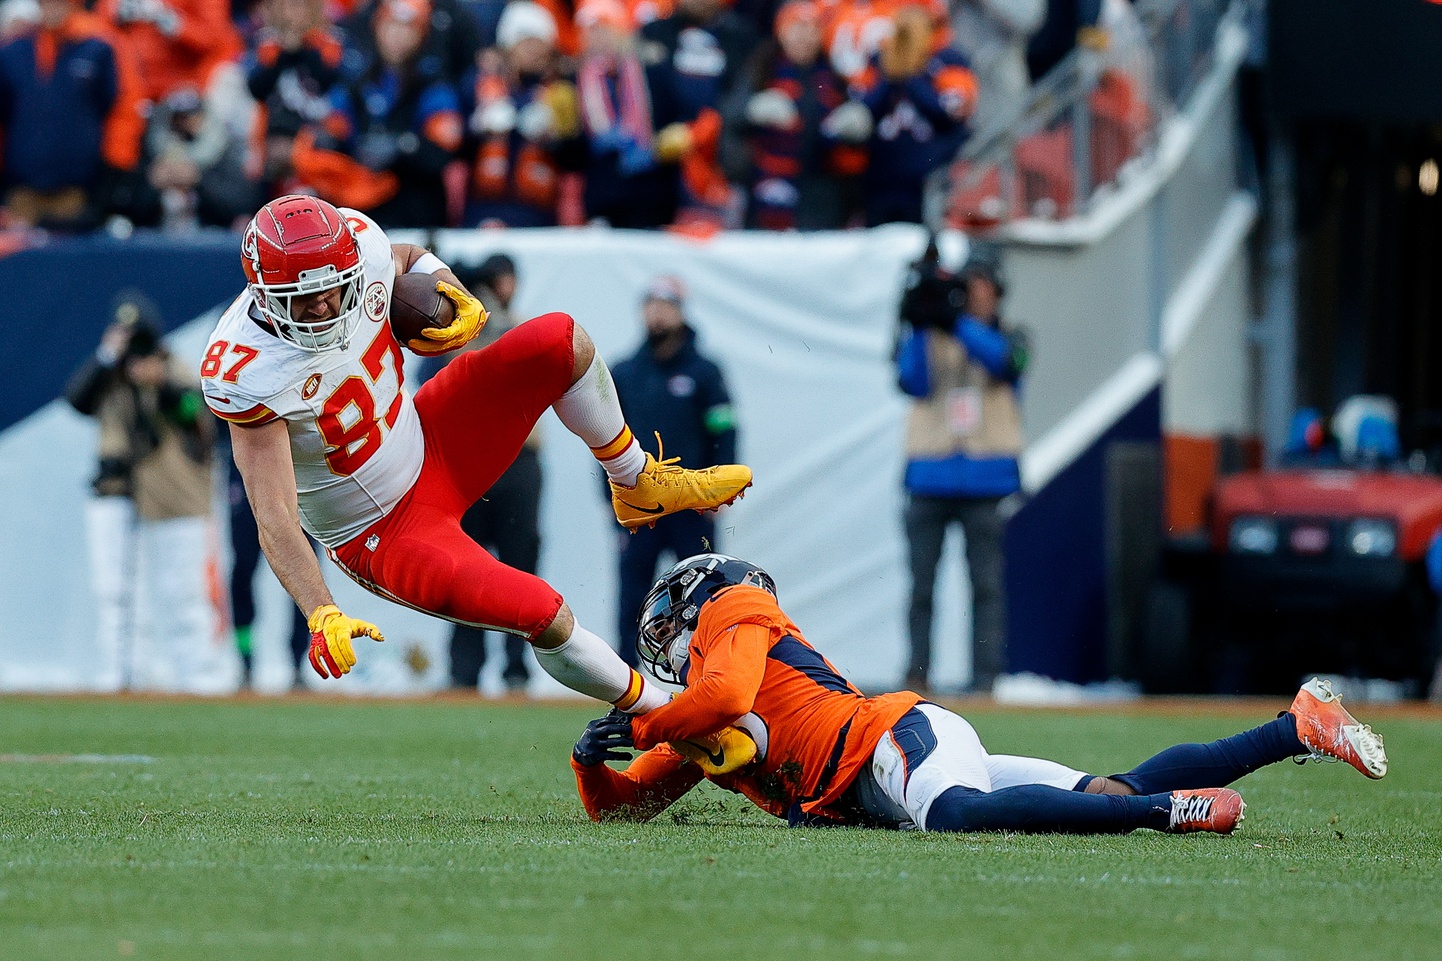 Kansas City Chiefs tight end Travis Kelce (87) is tackled by Denver Broncos safety P.J. Locke (6) in the fourth quarter at Empower Field at Mile High.